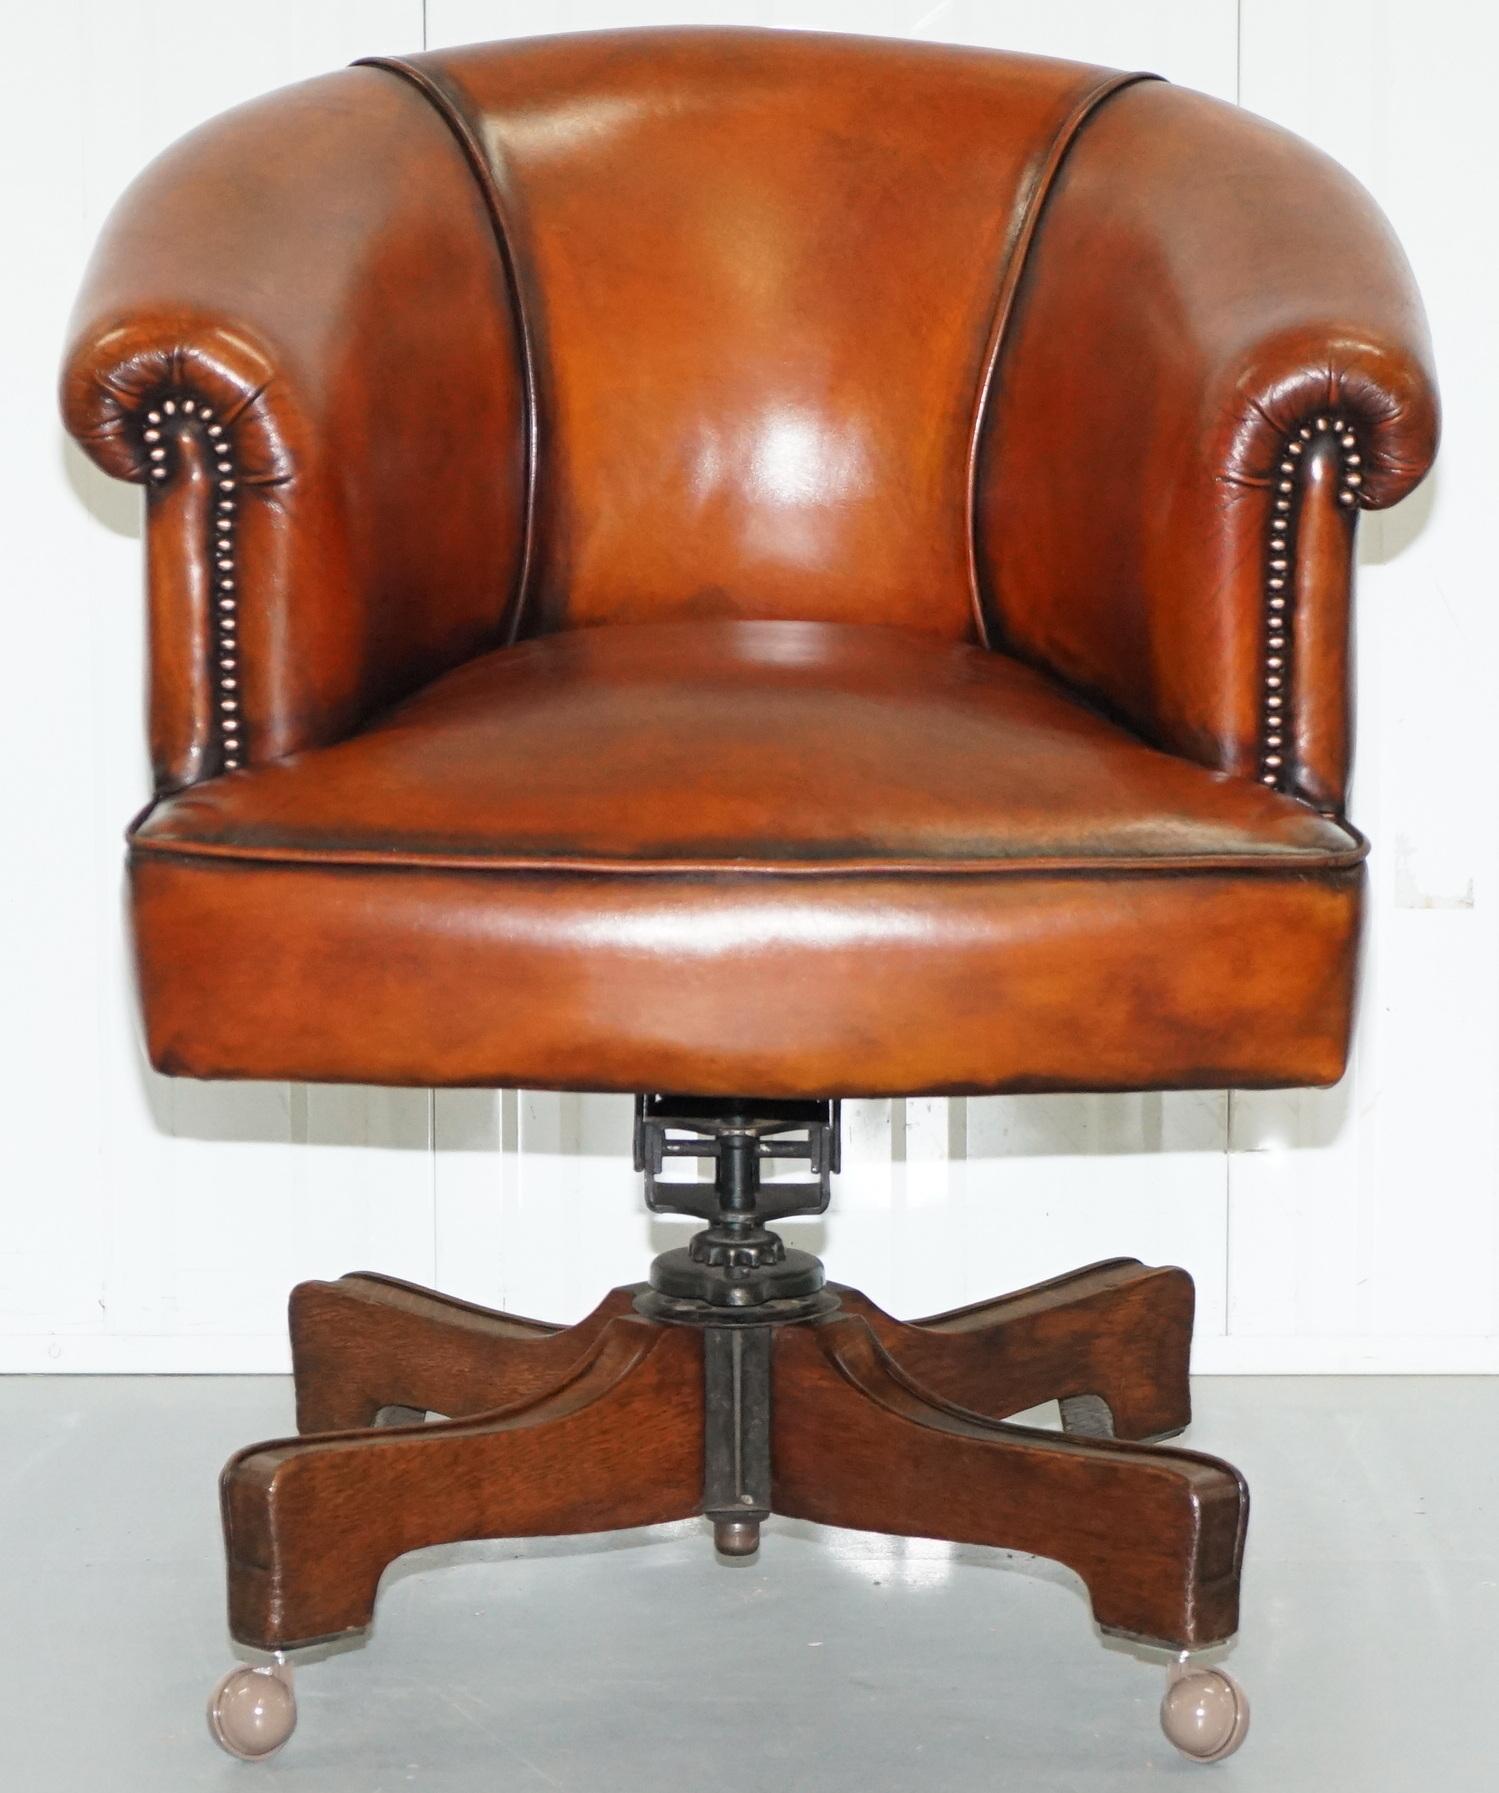 We are delighted to offer for sale this lovely fully restored early Victorian captains chair with over-engineered base 

This piece has been fully restored to include having the leather stripped back then hand dyed this stunning whisky brown, the